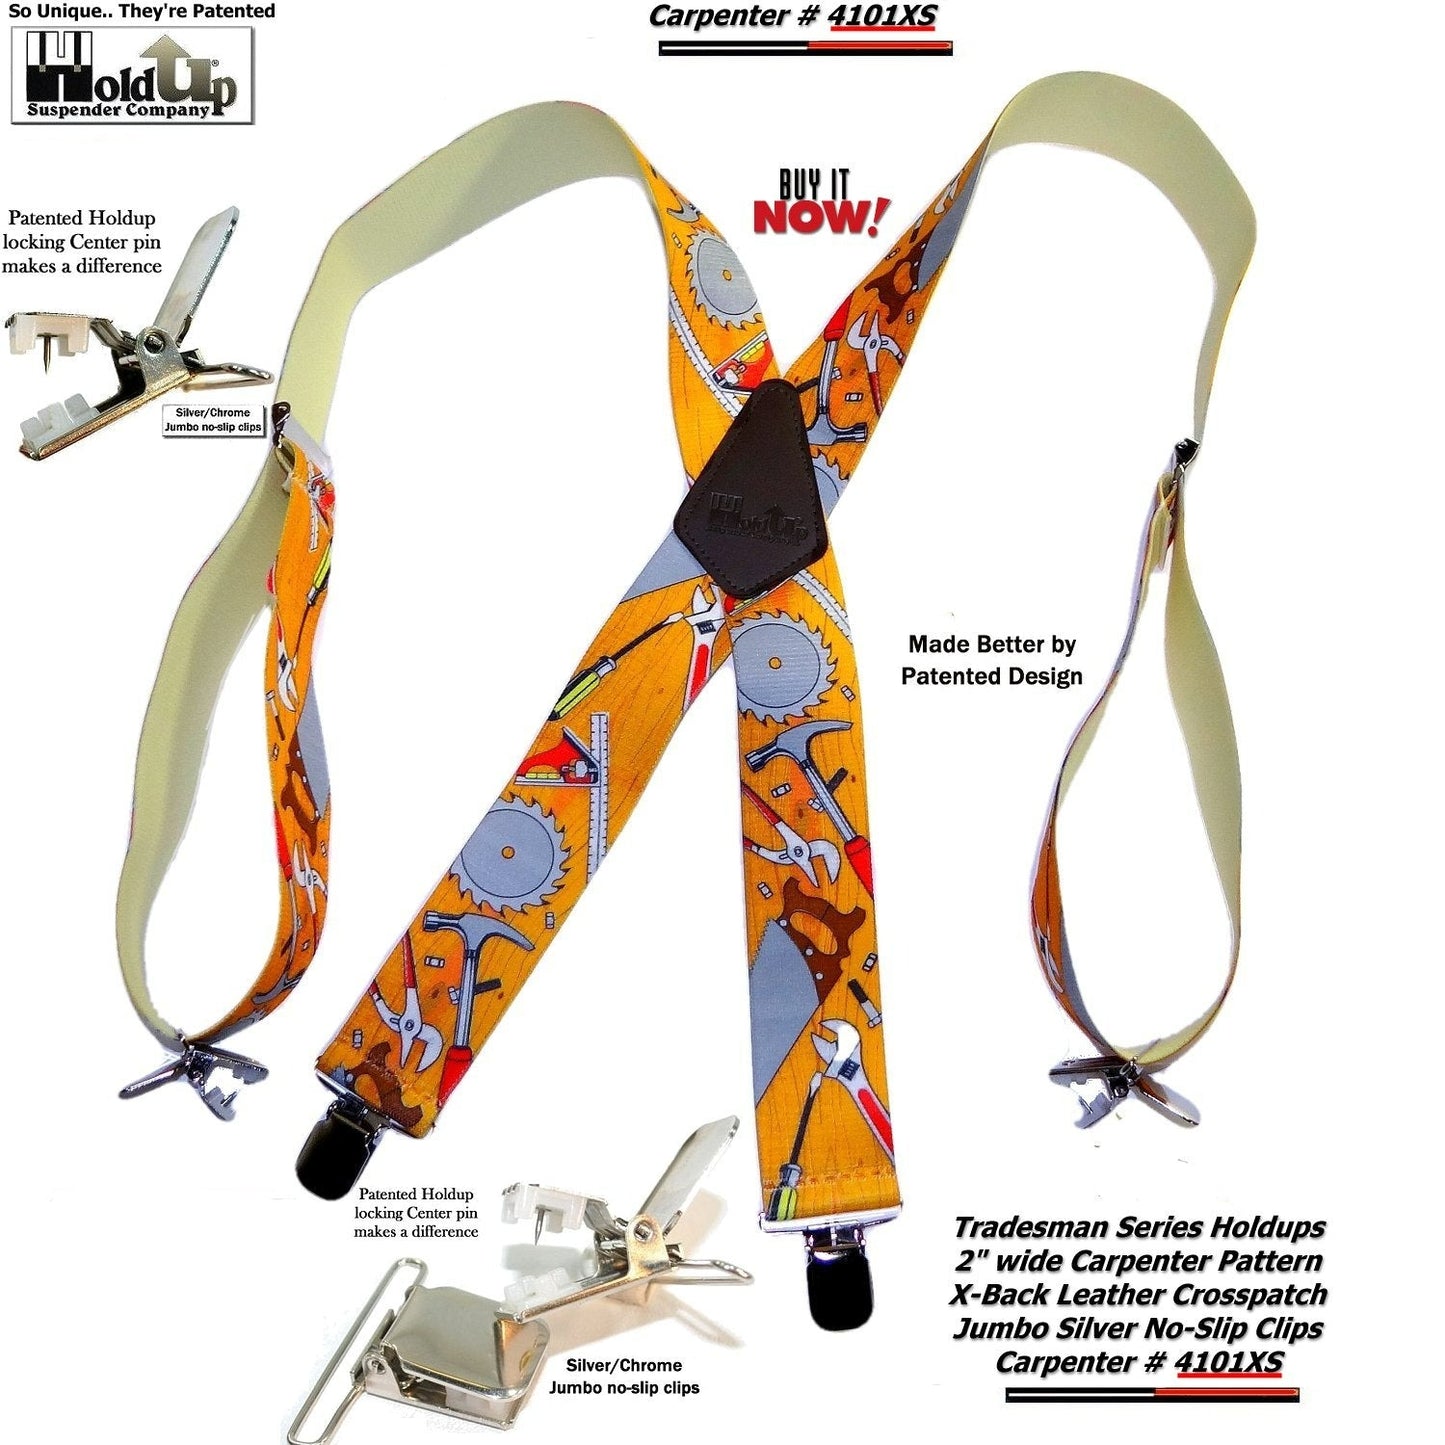 Holdup Tradesman Series Work Suspenders In Carpenter Pattern With USA Patented Jumbo No-slip Clips